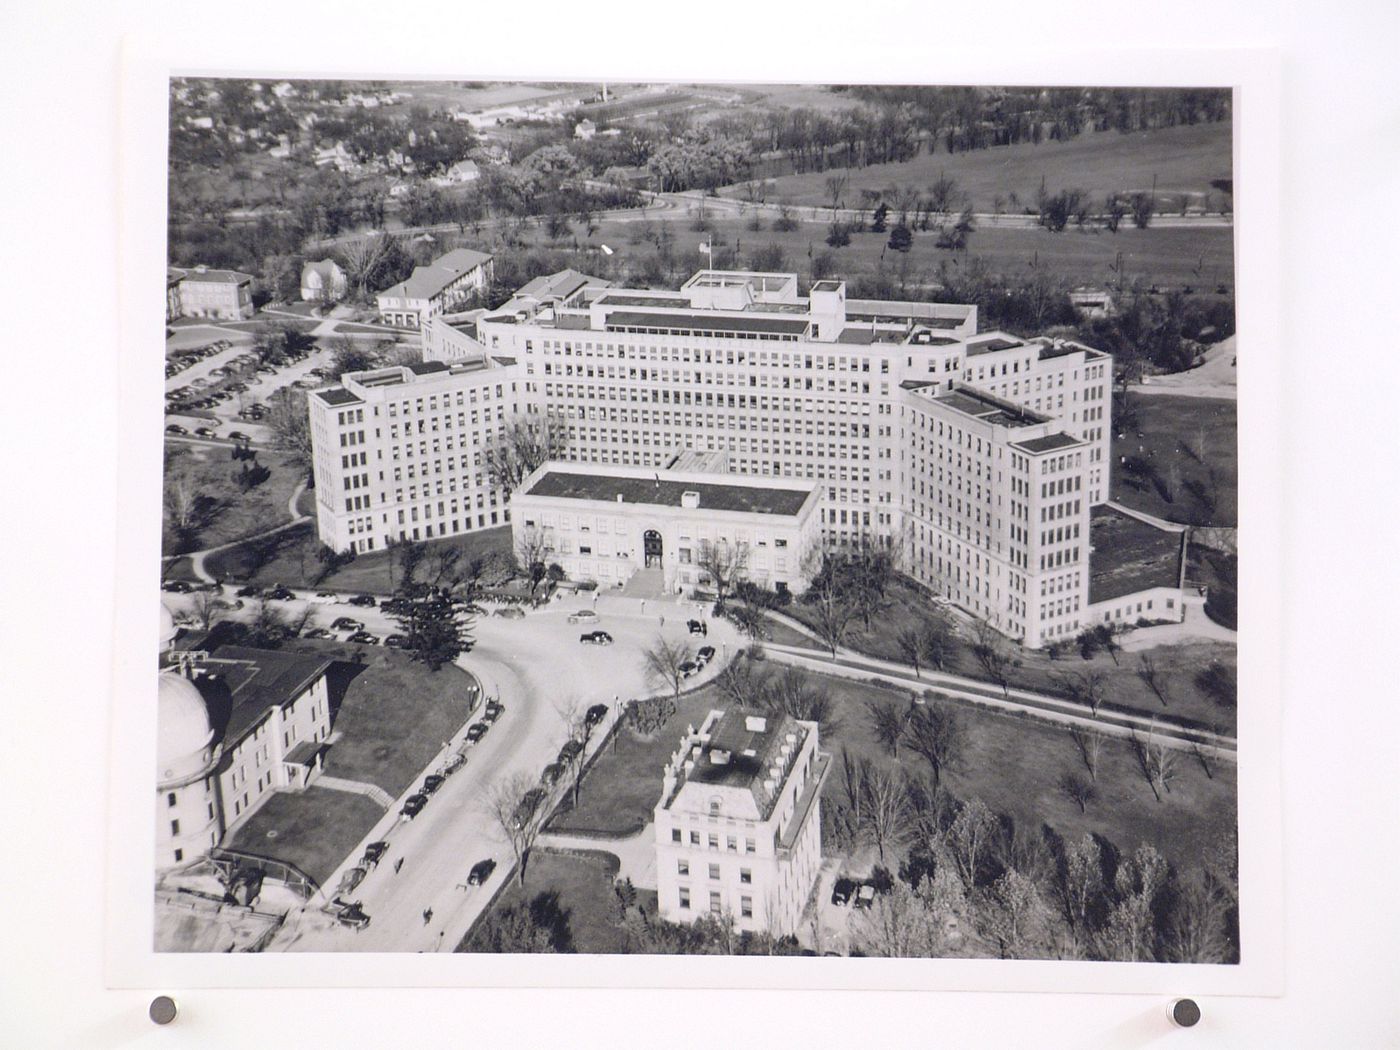 Aerial view of the University Hospital (now the University of Michigan Health System), 1500 East Medical Center Drive, University of Michigan, Ann Arbor, Michigan